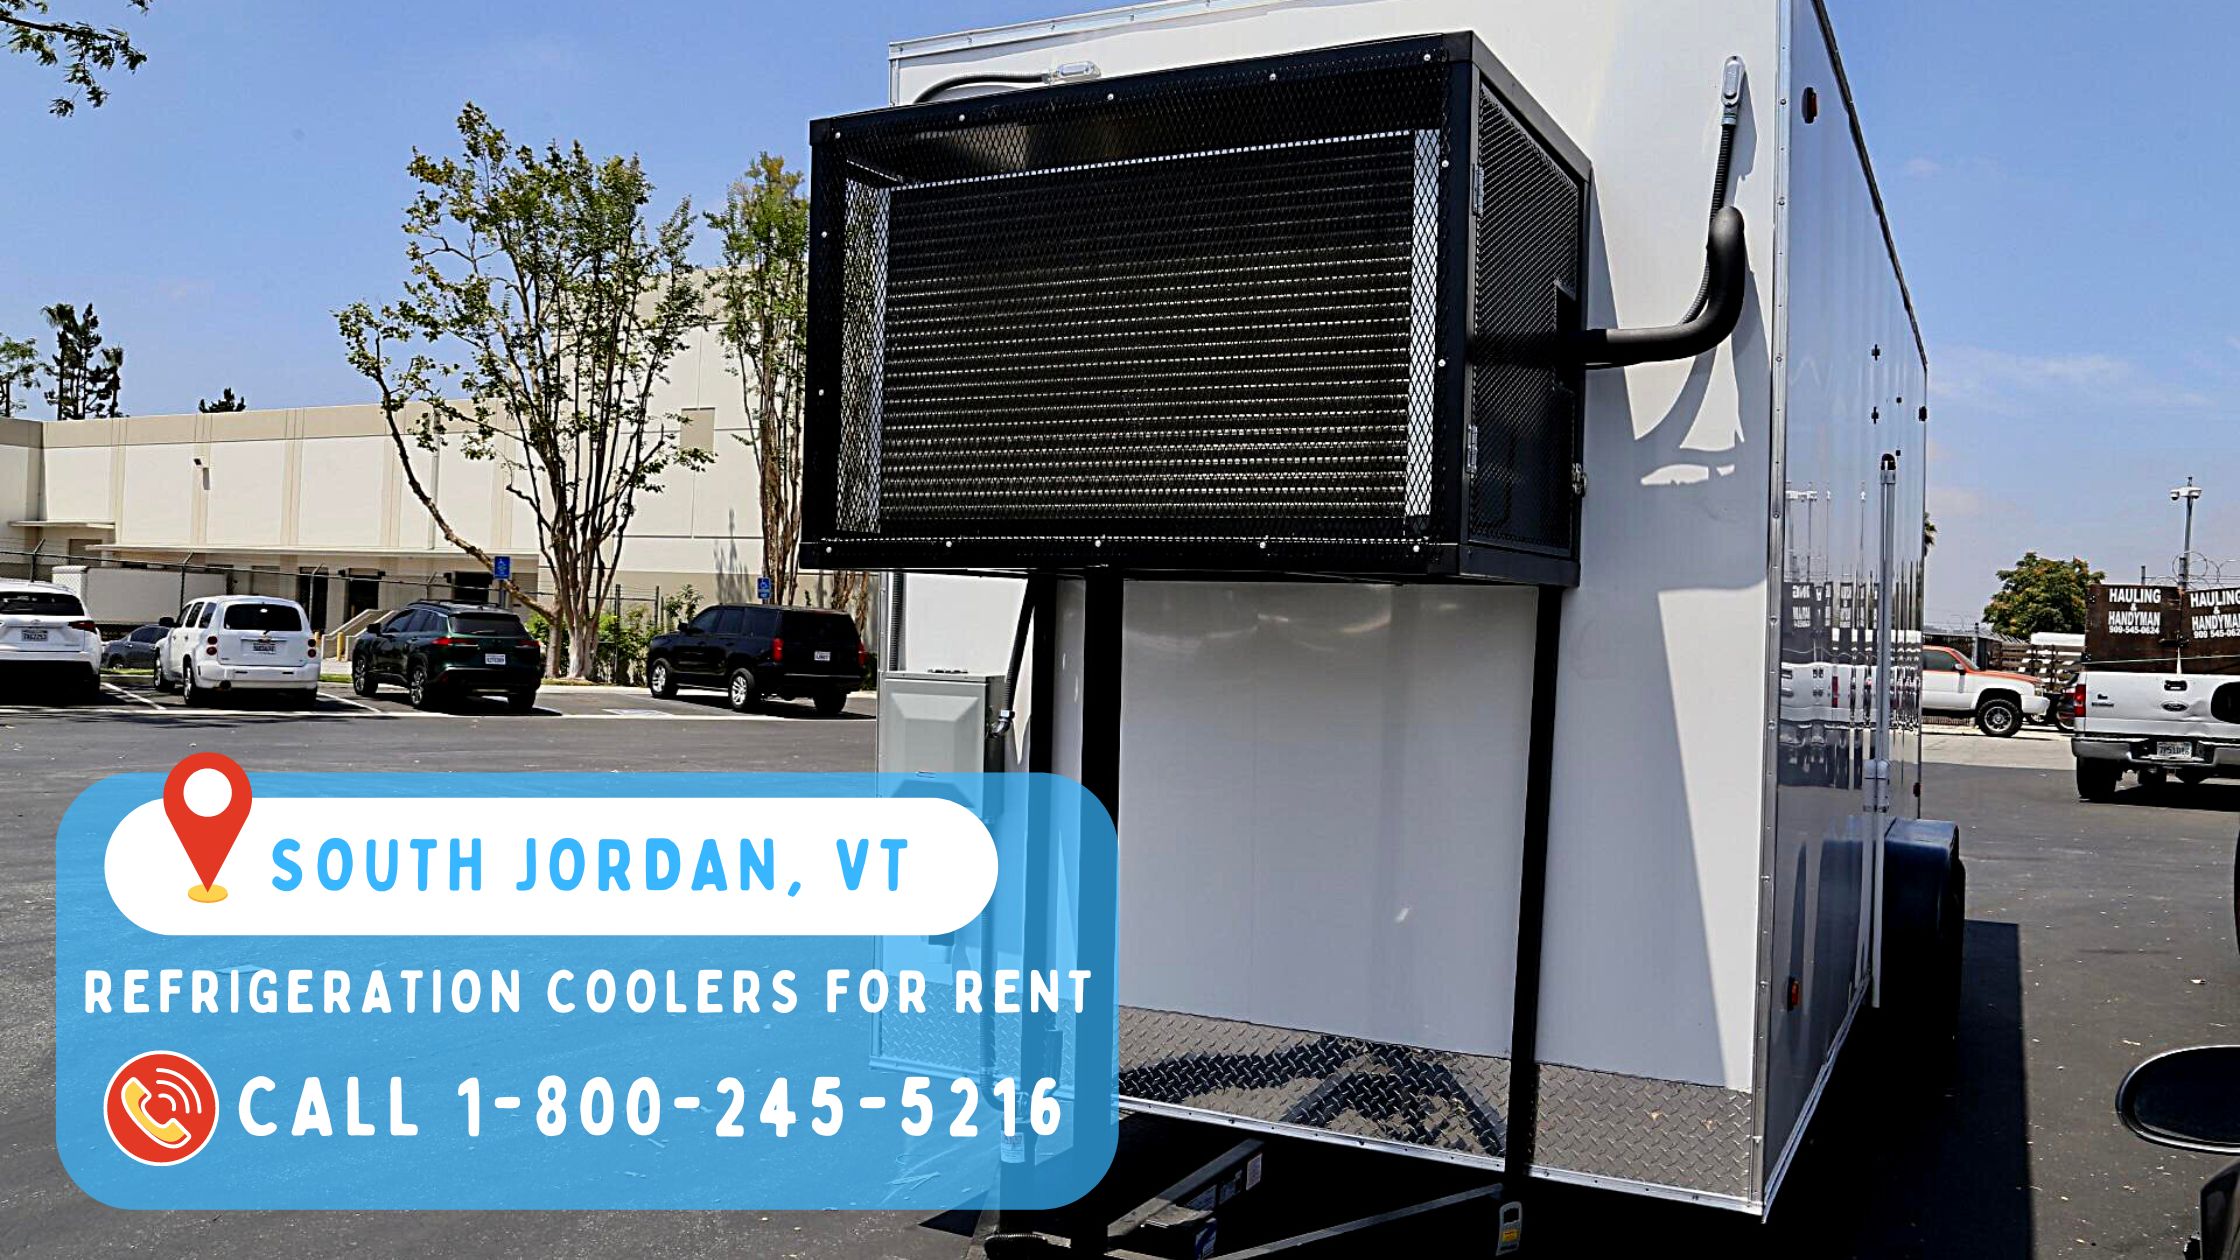 Refrigeration Coolers for Rent in South Jordan